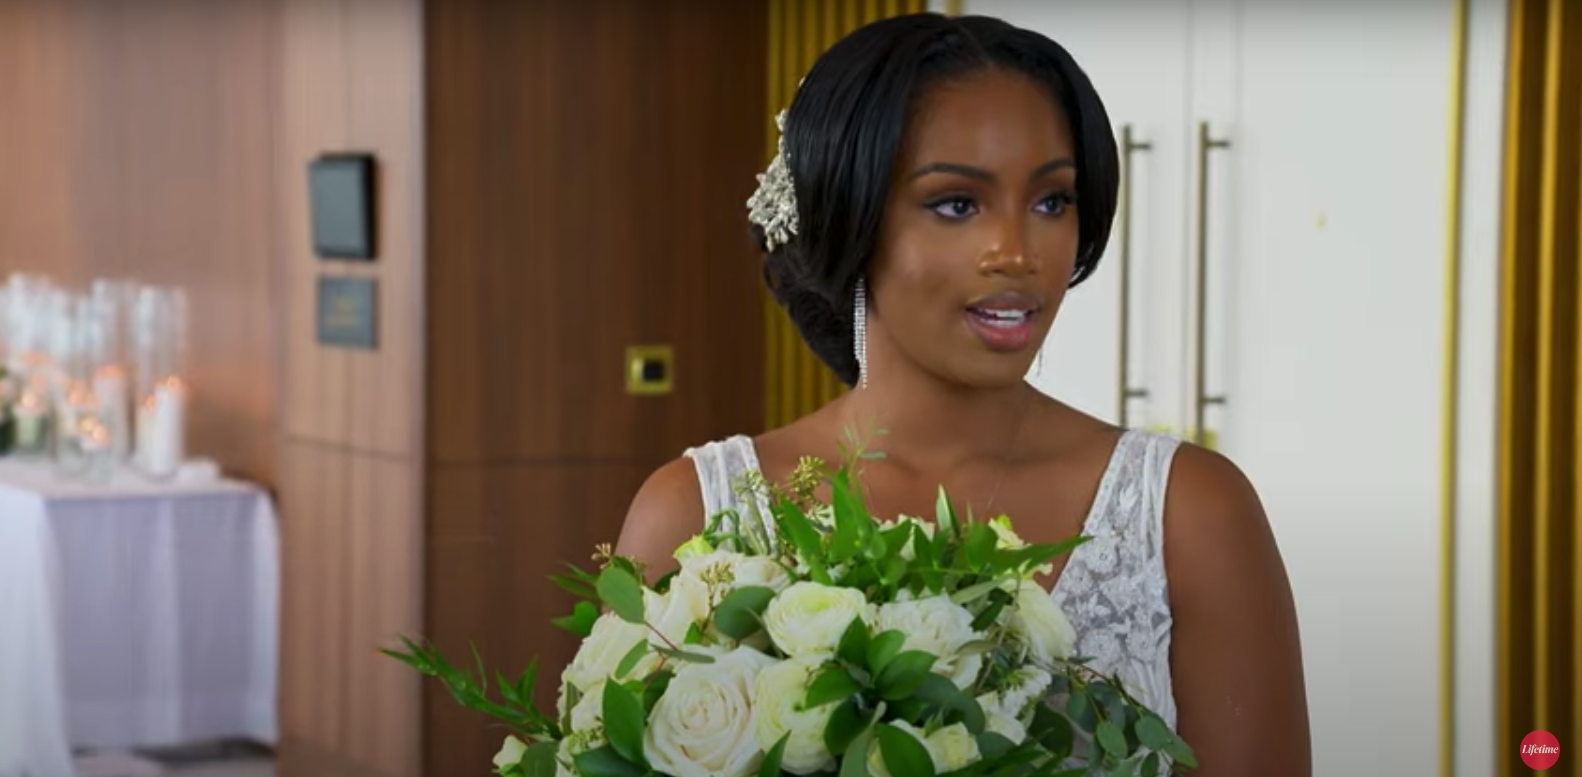 Kirsten from 'Married at First Sight' Season 16 on her wedding day before her honeymoon at a resort in Jamaica